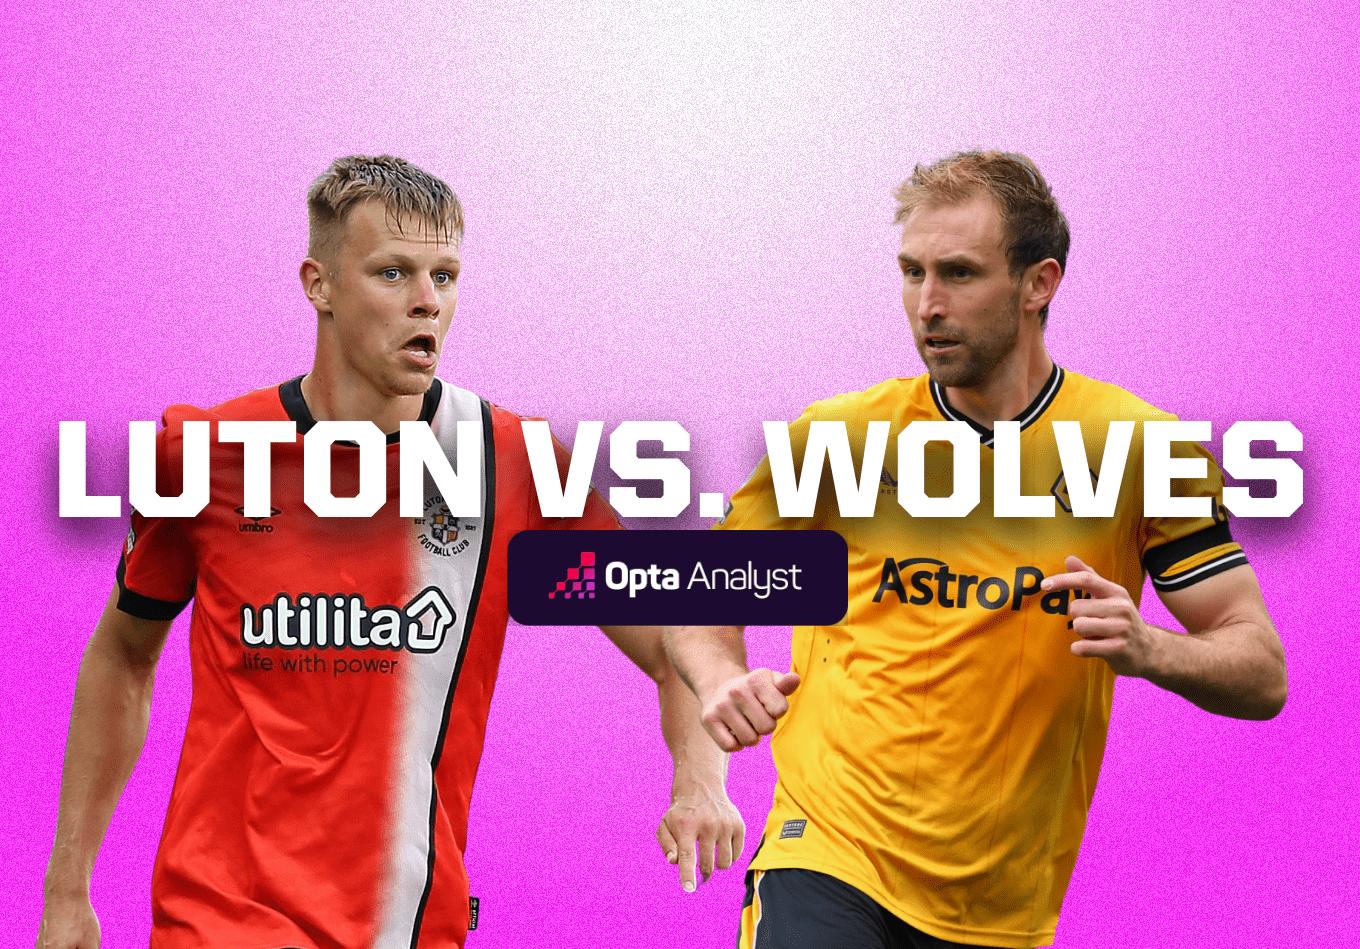 Luton Town vs Wolves: Prediction and Preview